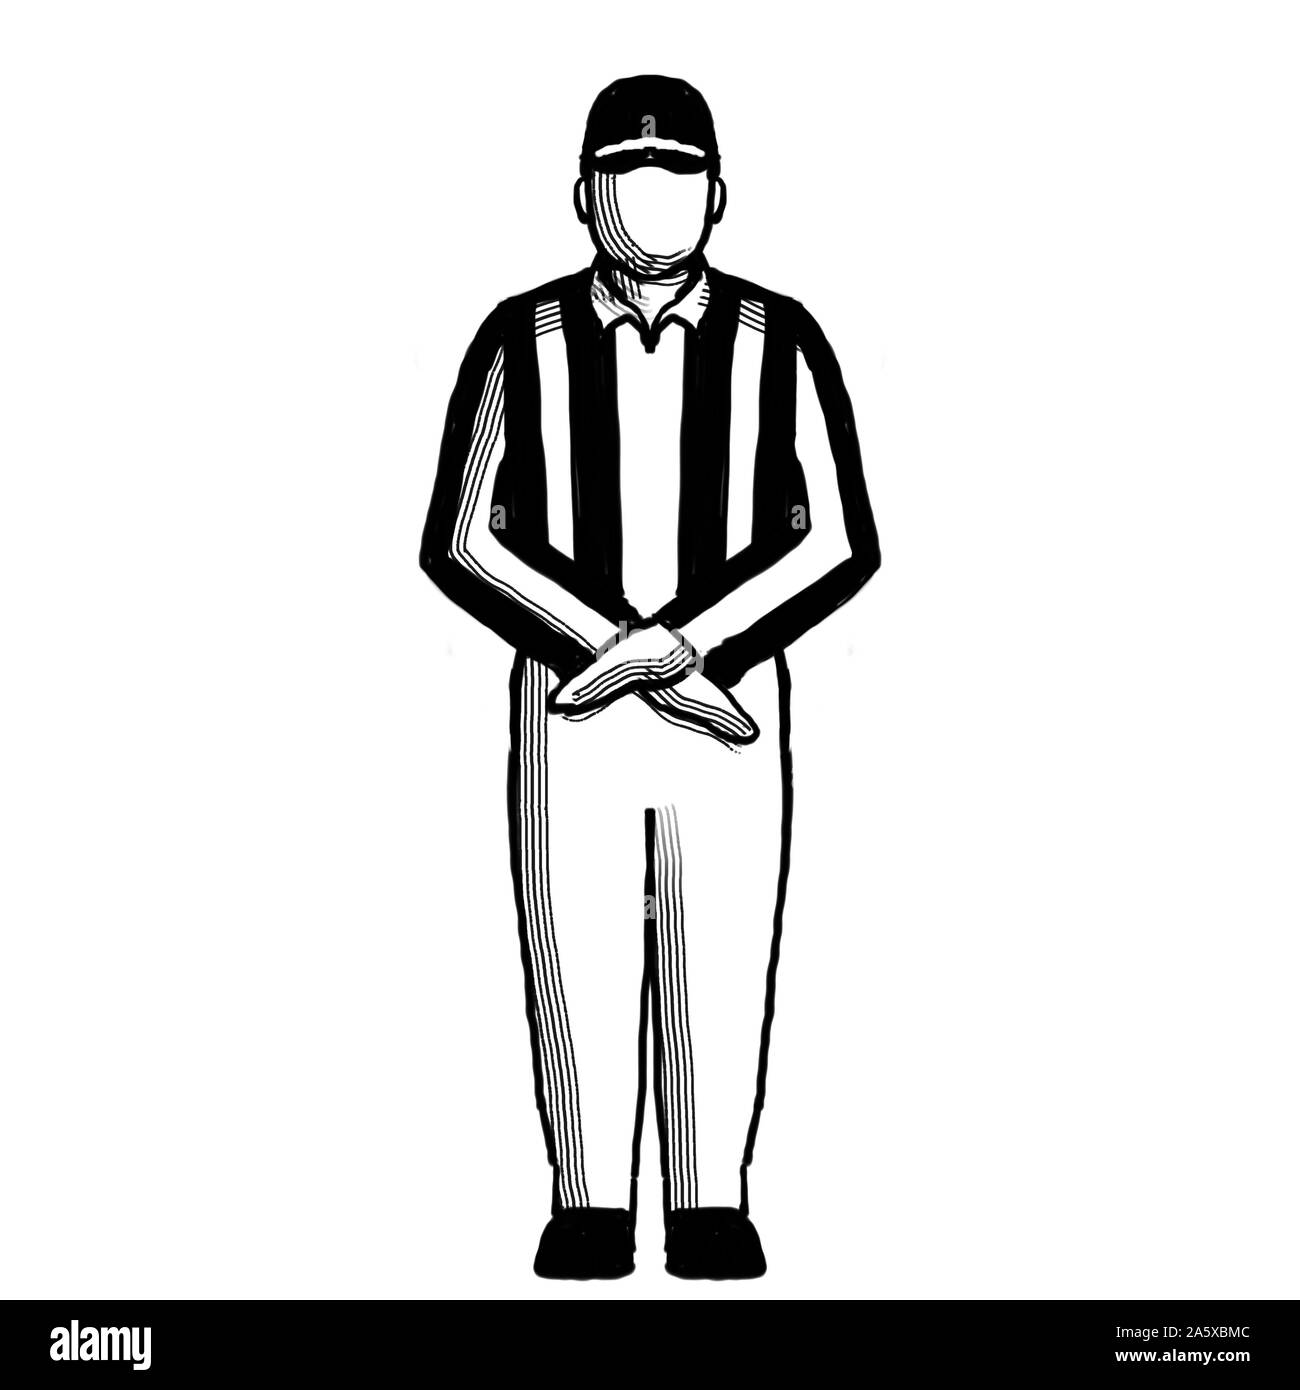 Retro style illustration of an American football referee or official with hand signal showing penalty refused, incomplete pass, missed field goal sign Stock Photo